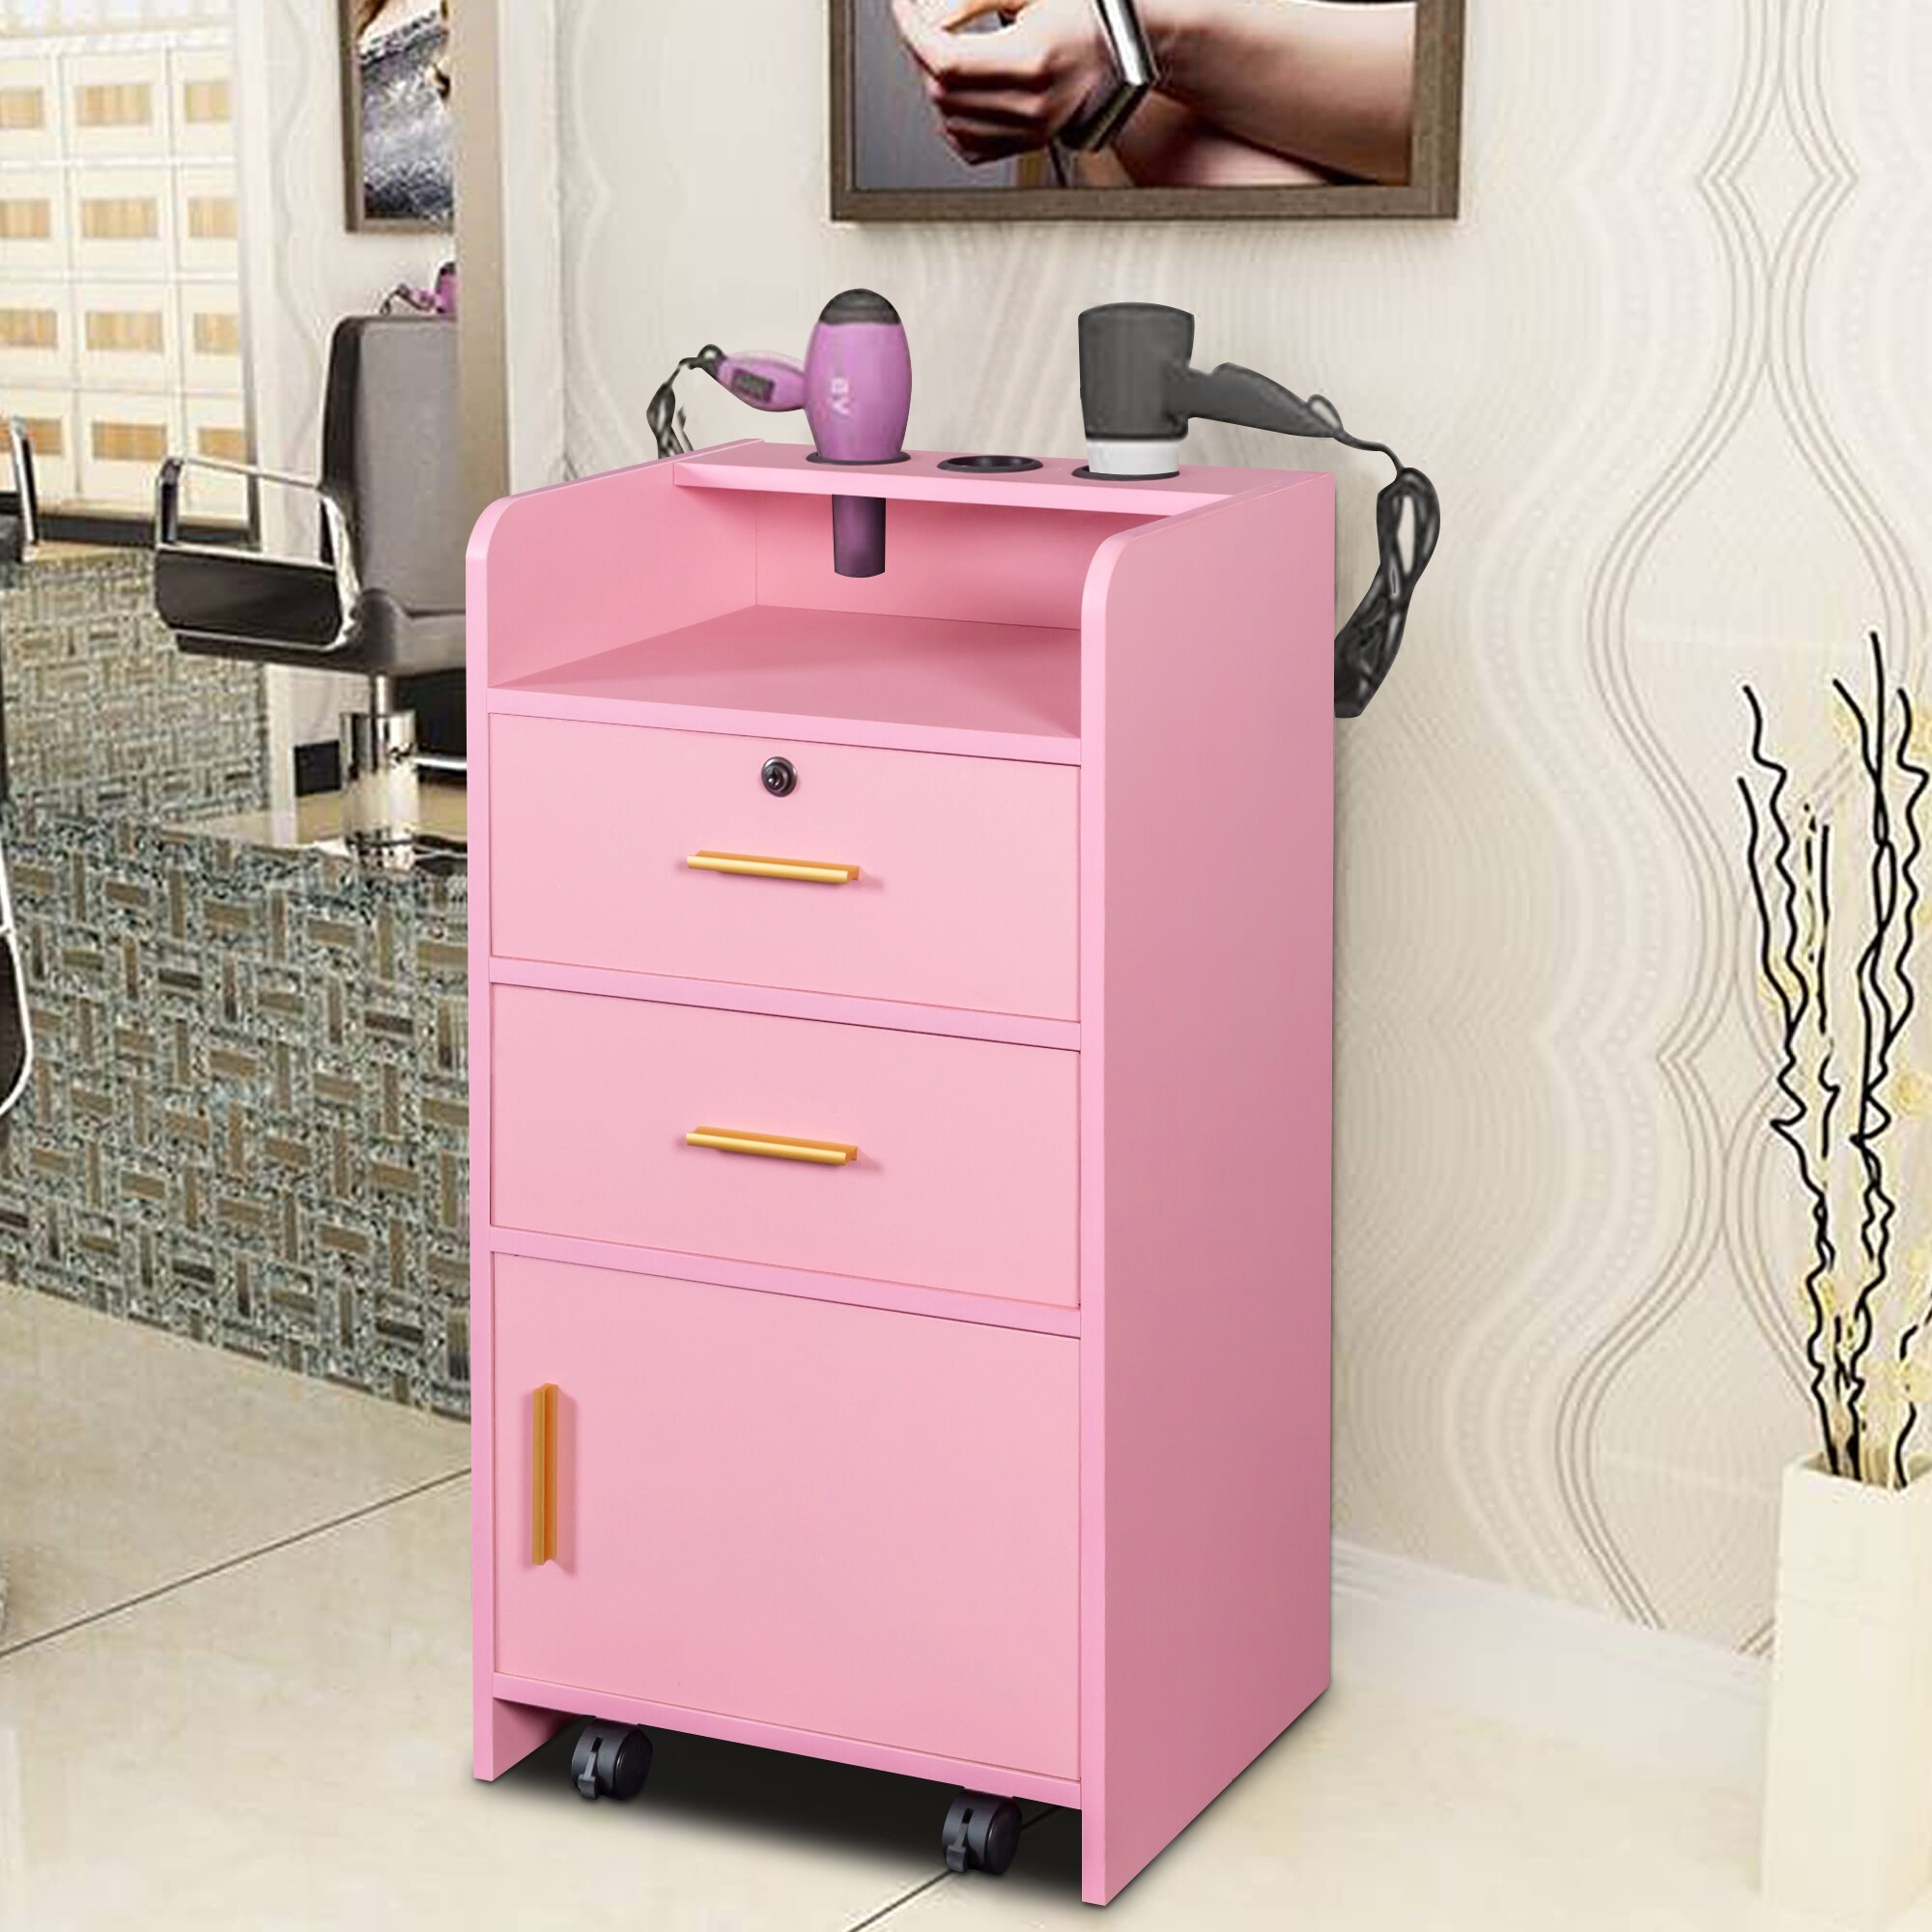 https://ak1.ostkcdn.com/images/products/is/images/direct/602496f198b8bbc736f0cb2f9ef0dbcd9f45afde/Beauty-Salon-Station-with-Wheels%2C-Drawers%2C-3-Hair-Dryer-Holders.jpg